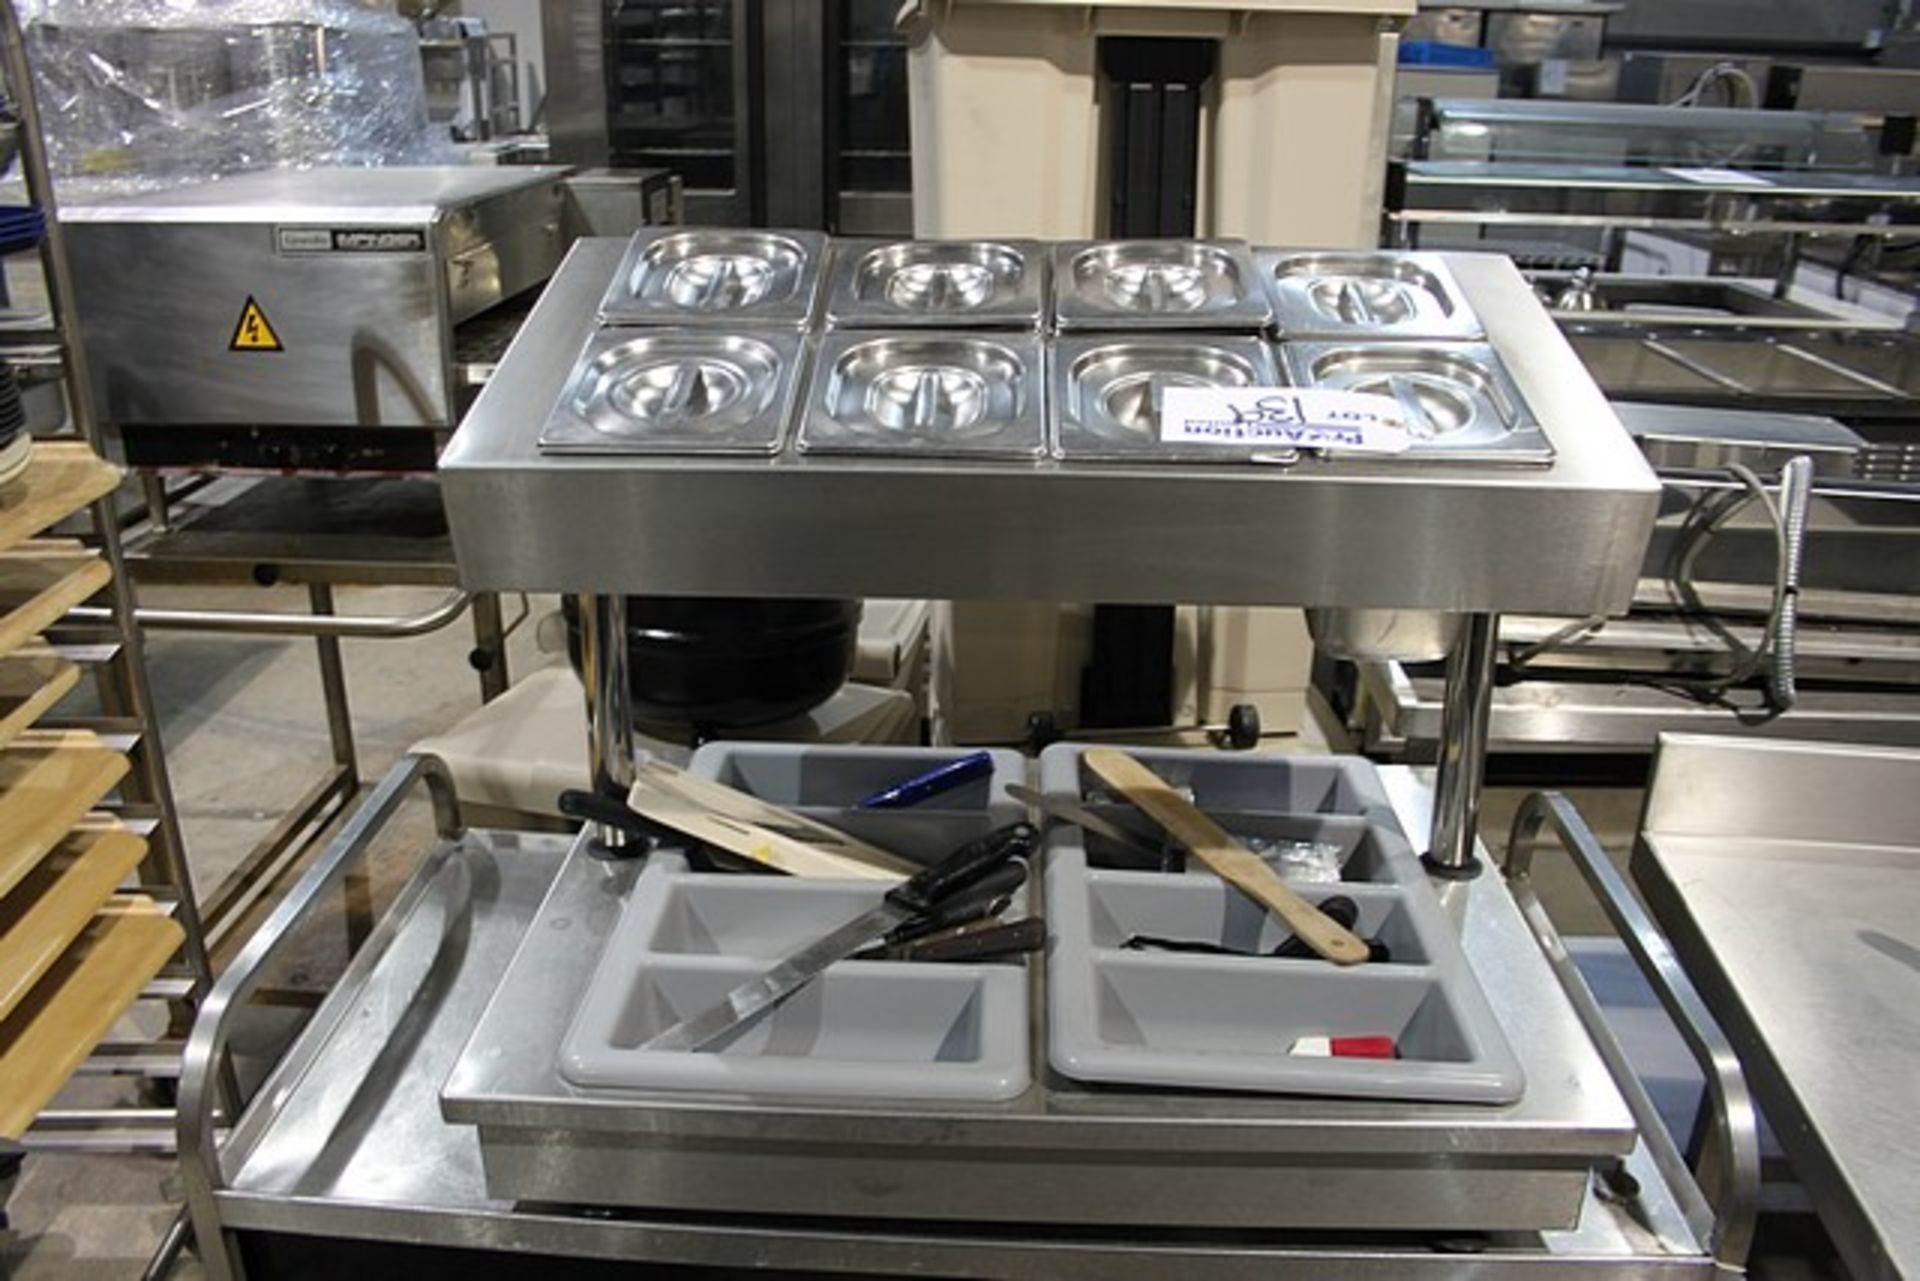 Stainless steel picking unit for salads / pizza preparation 800mm x 550mm x 550mm